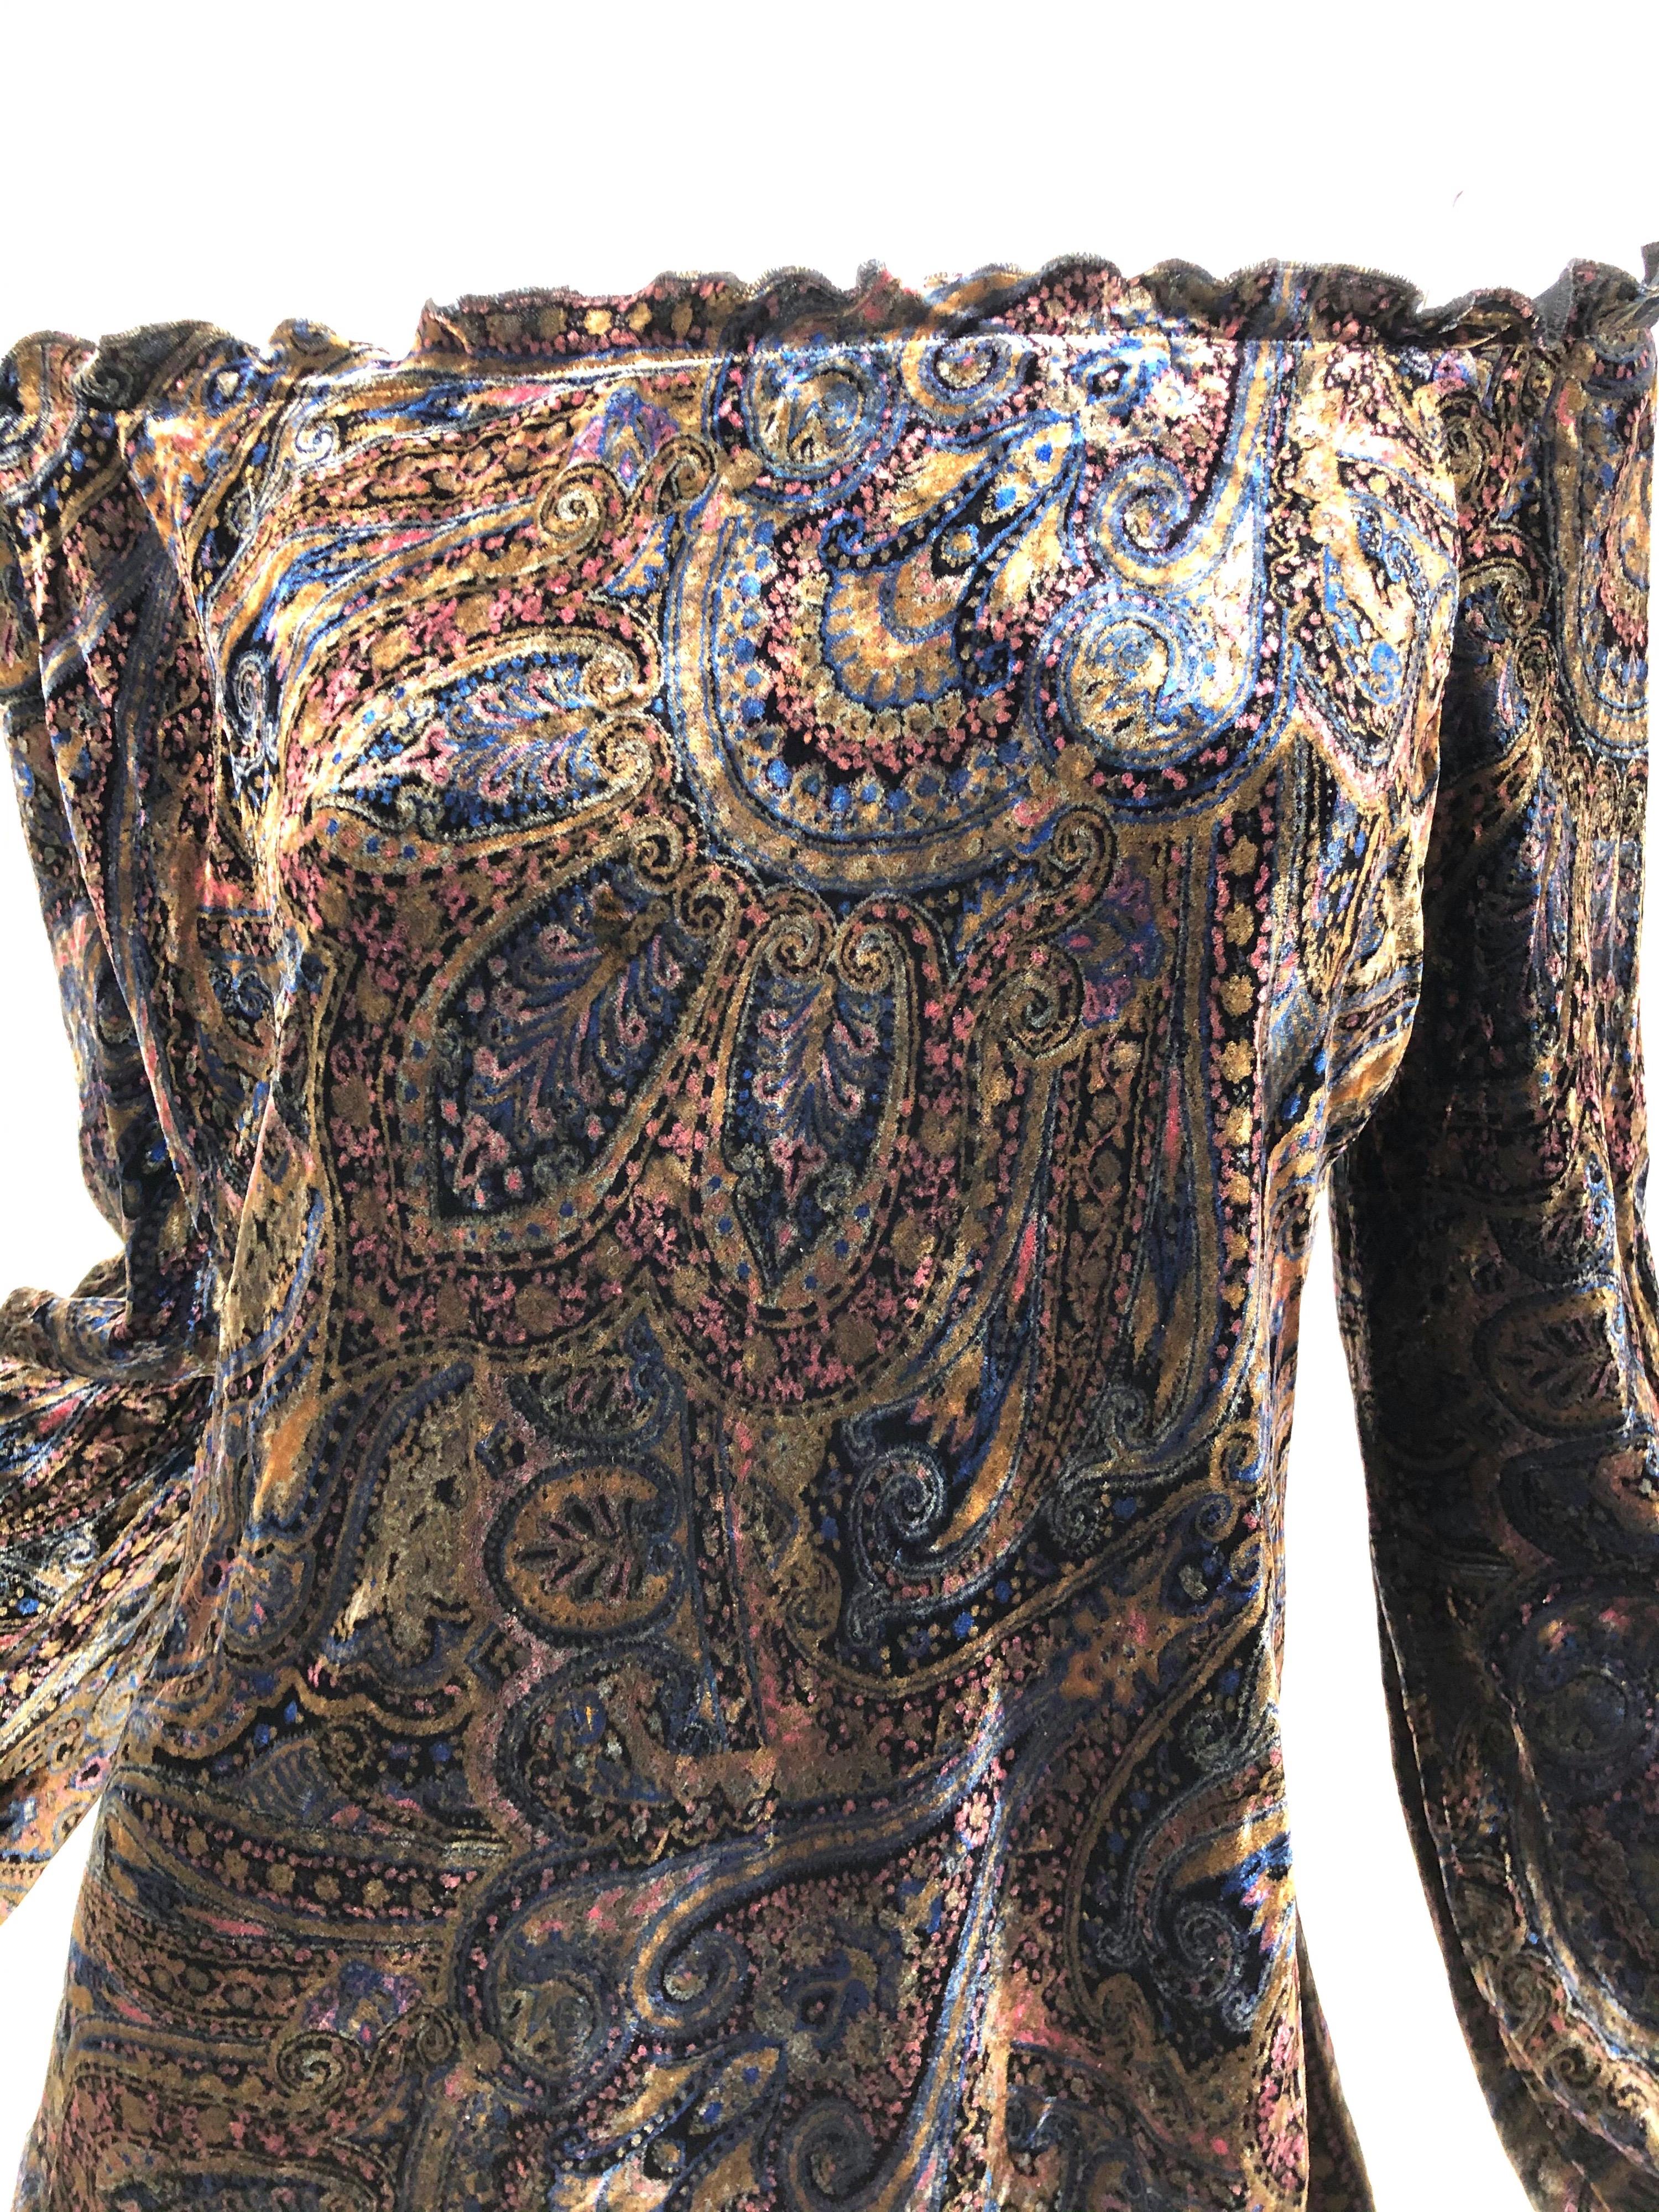 Chic mid 90s vintage RALPH LAUREN COLLECTION black label paisley lightweight velvet Size 14 blouse top ! Features warm tones of taupe, blue, brown, pink and tan throughout. Simply slips over the head and stretches to fit. Can easily be dressed up or